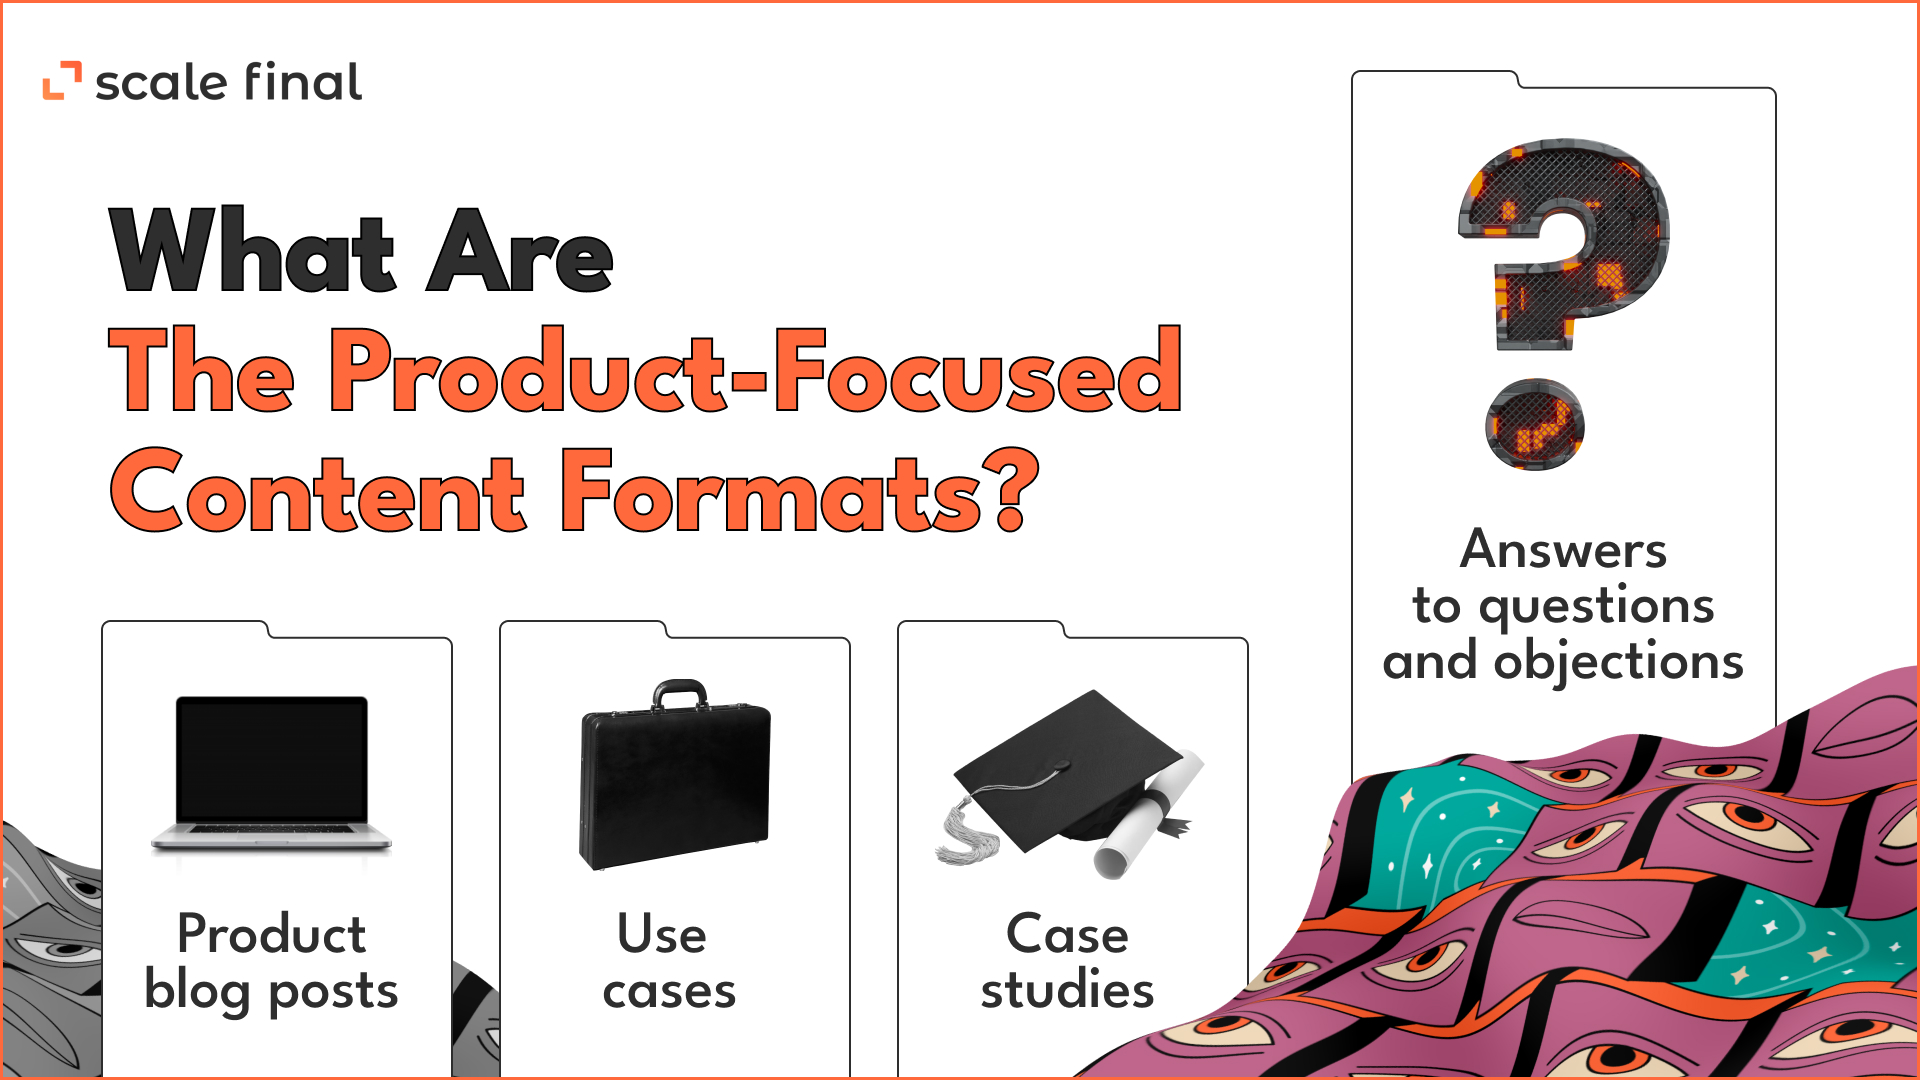 What are the product-focused content formats?1. Product blog posts2.  Use cases3. Case studies4. Answers to questions and objections